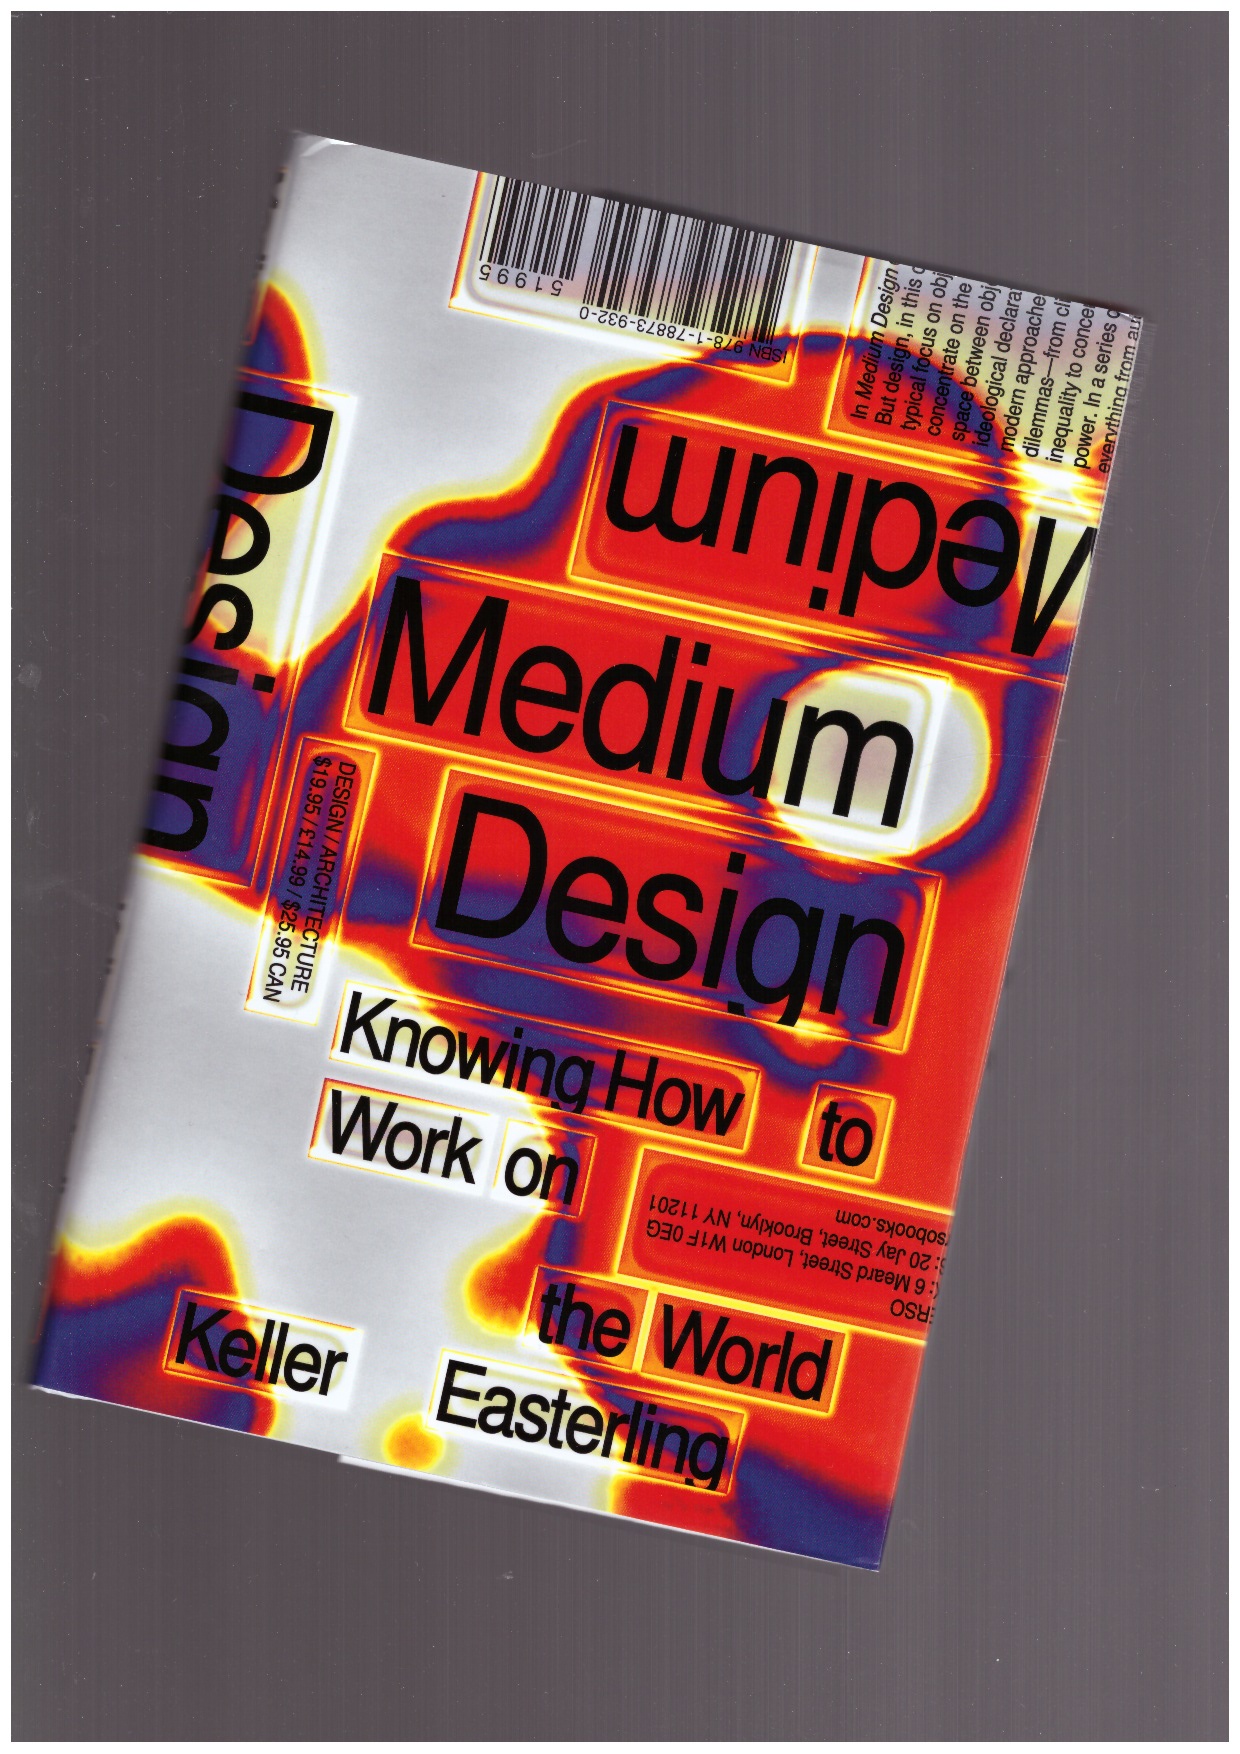 EASTERLING, Keller - Medium Design. Knowing How to Work on the World